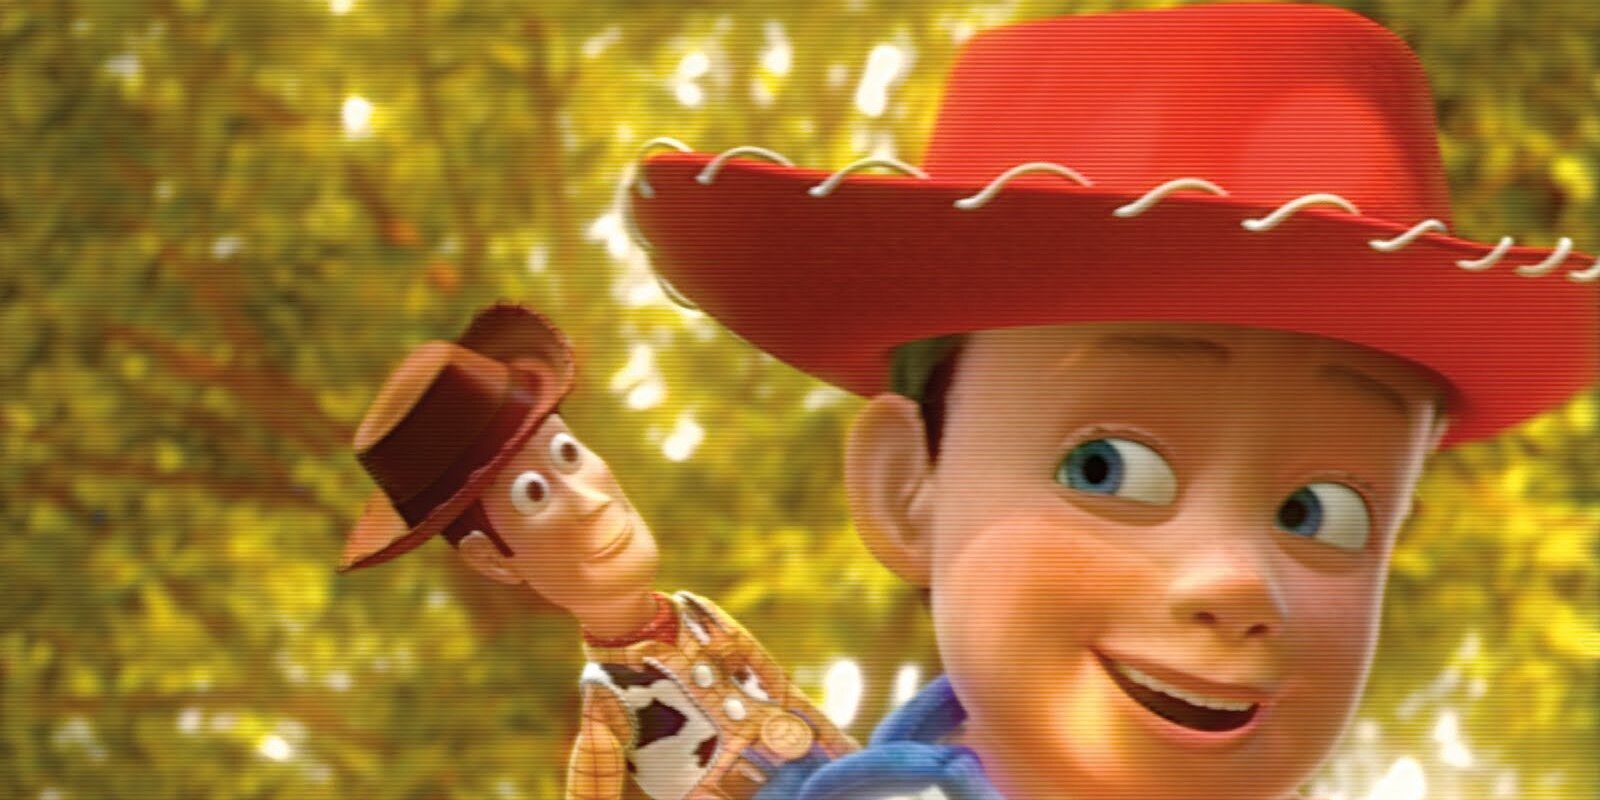 Woody On Andy's Shoulders Playing Toy Story 1.jpg